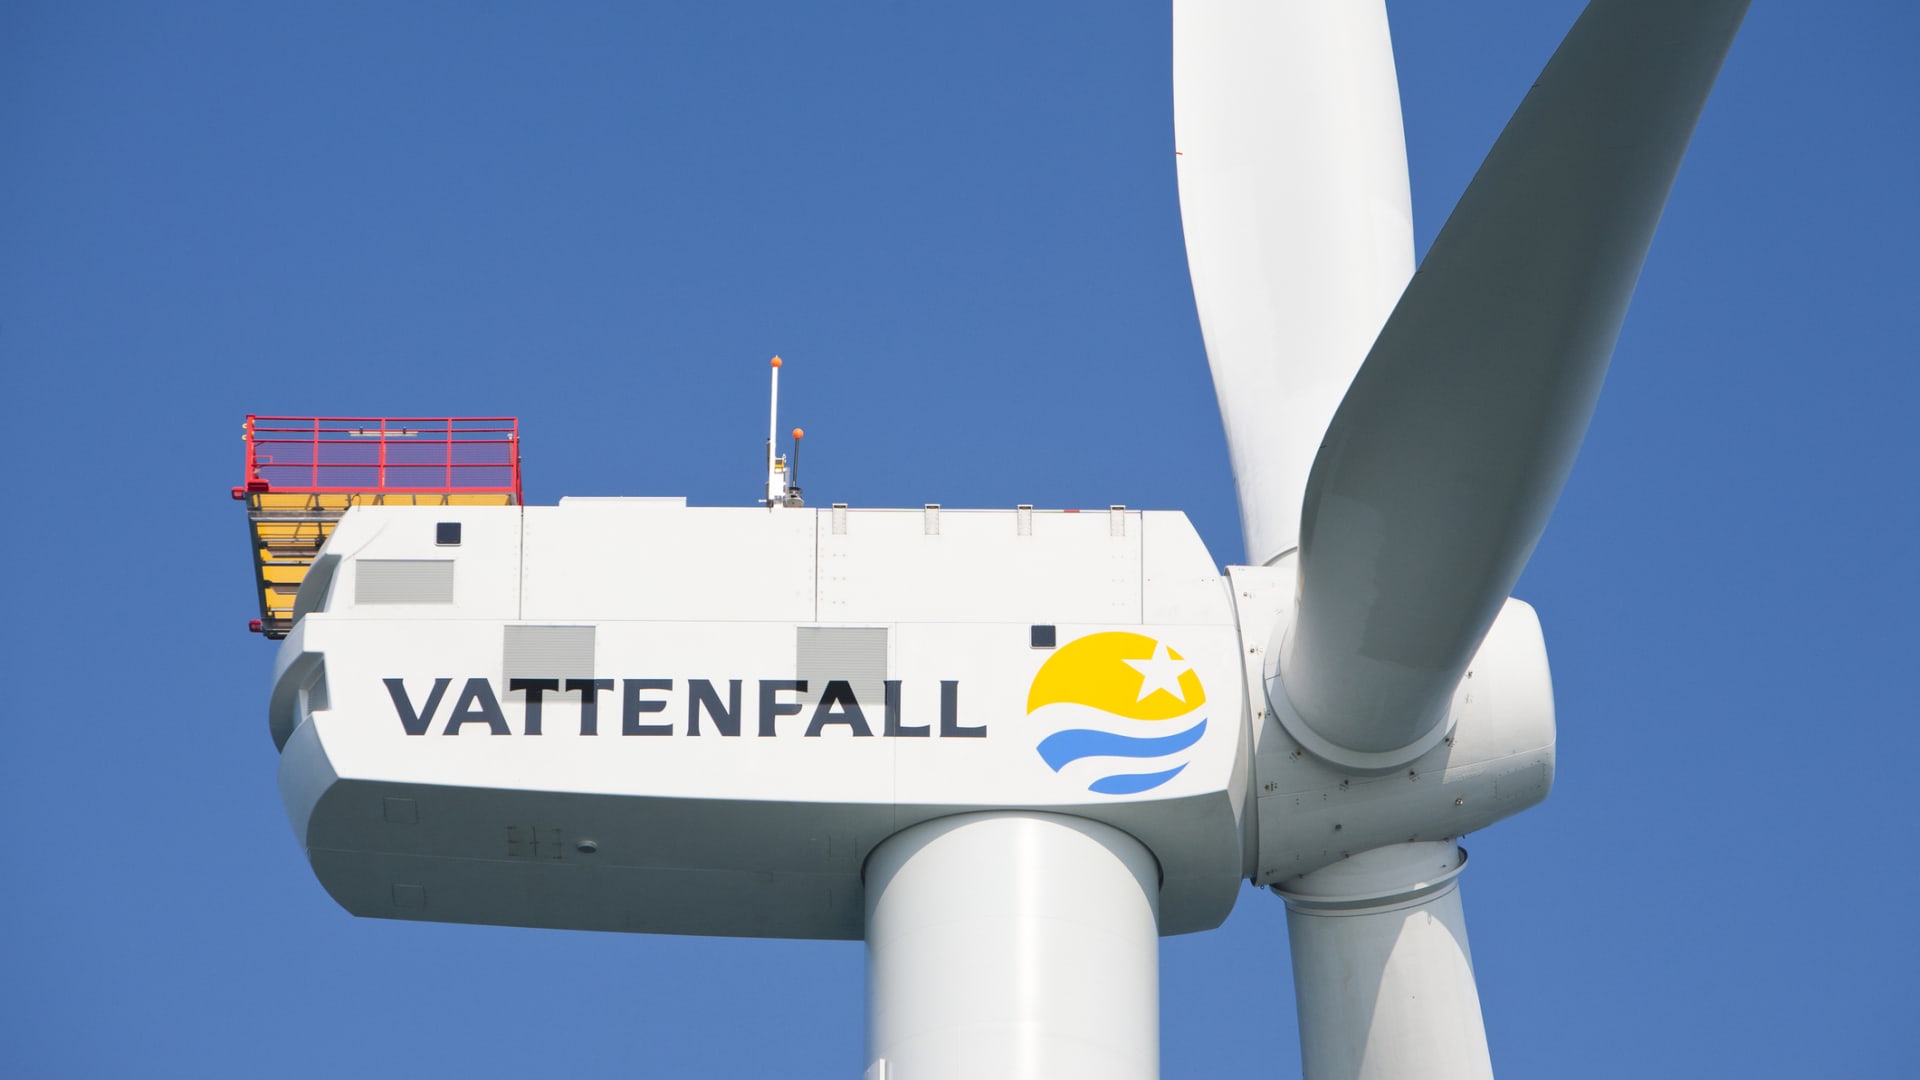 Huge offshore wind farm to use recyclable turbine blades